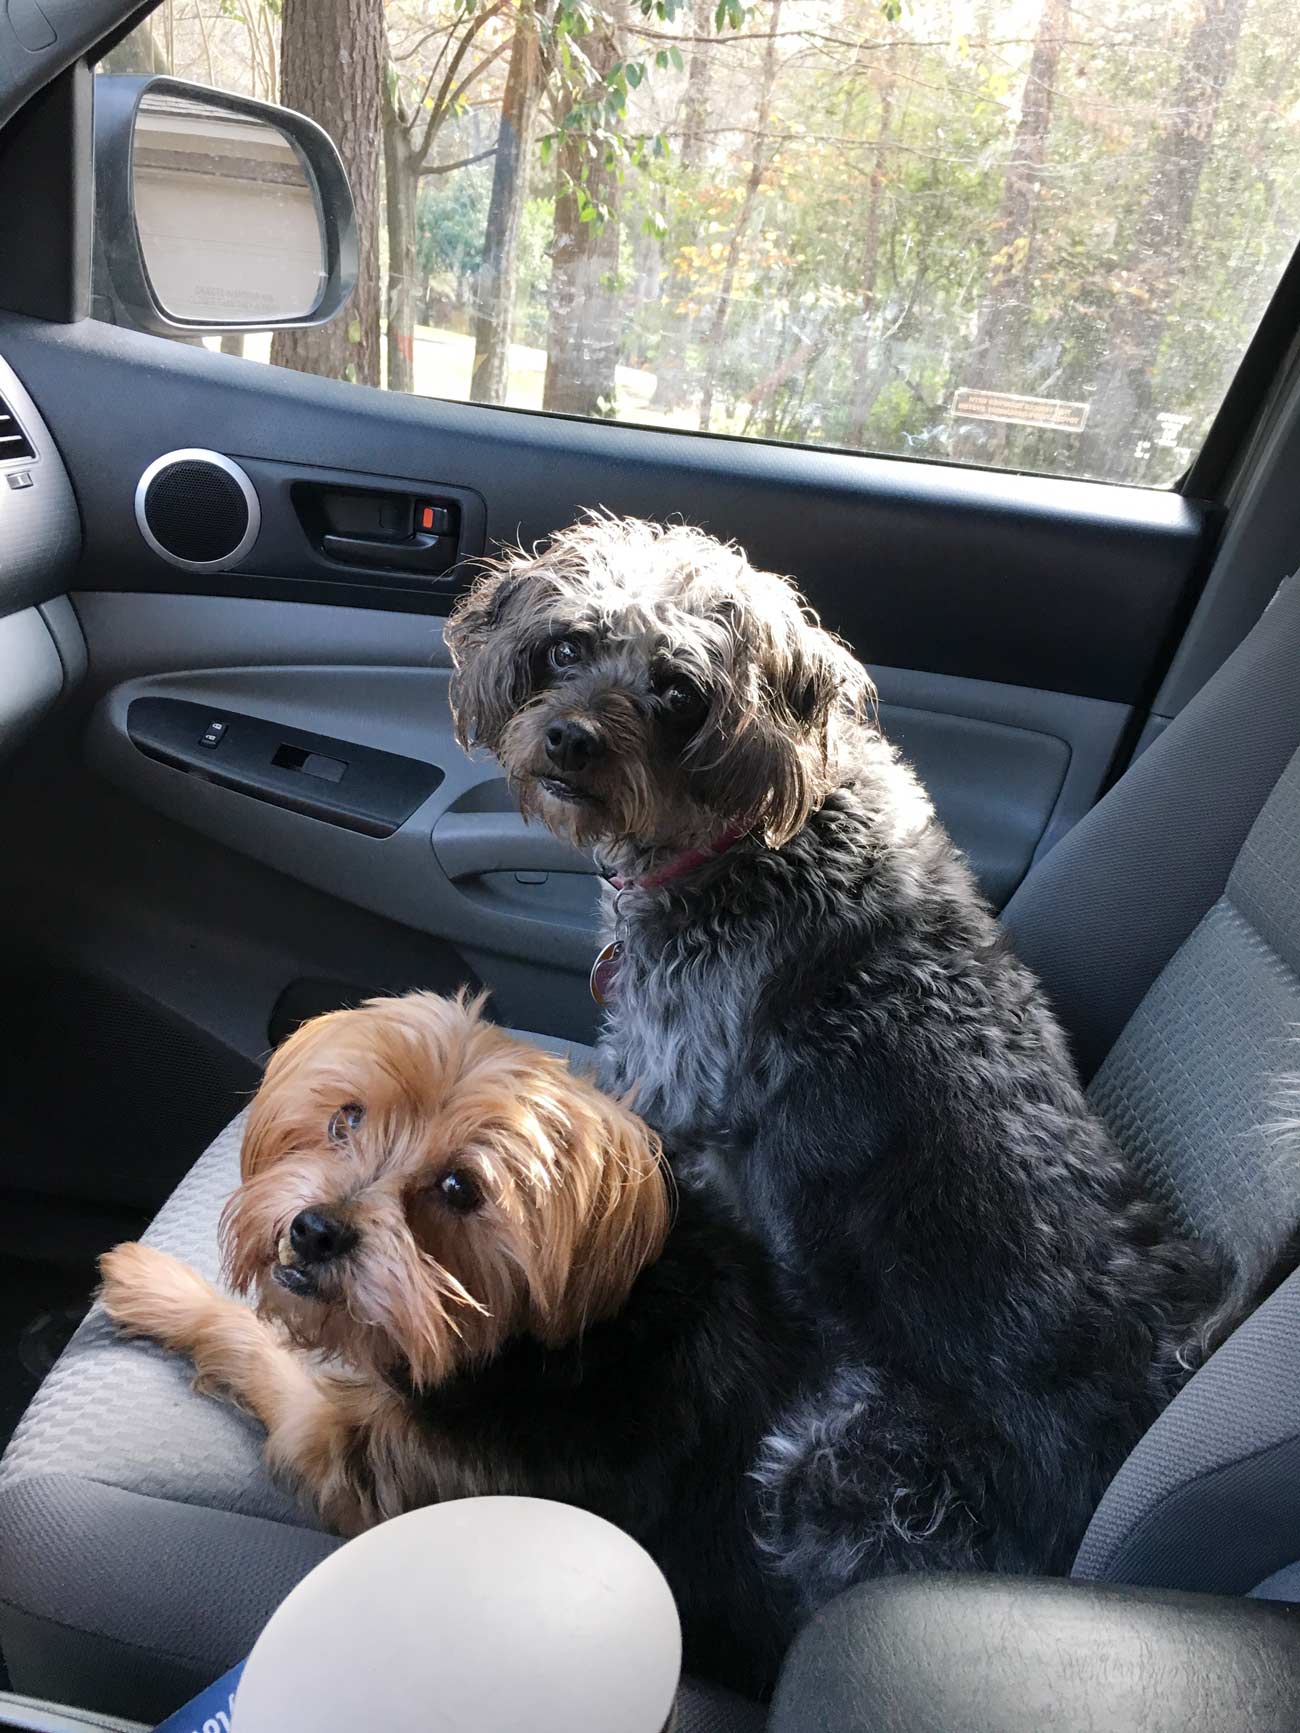 Meet Manny and Penny! All dog mom Peggy Z. needs to say is “who wants to go for a ride?” and open the door.